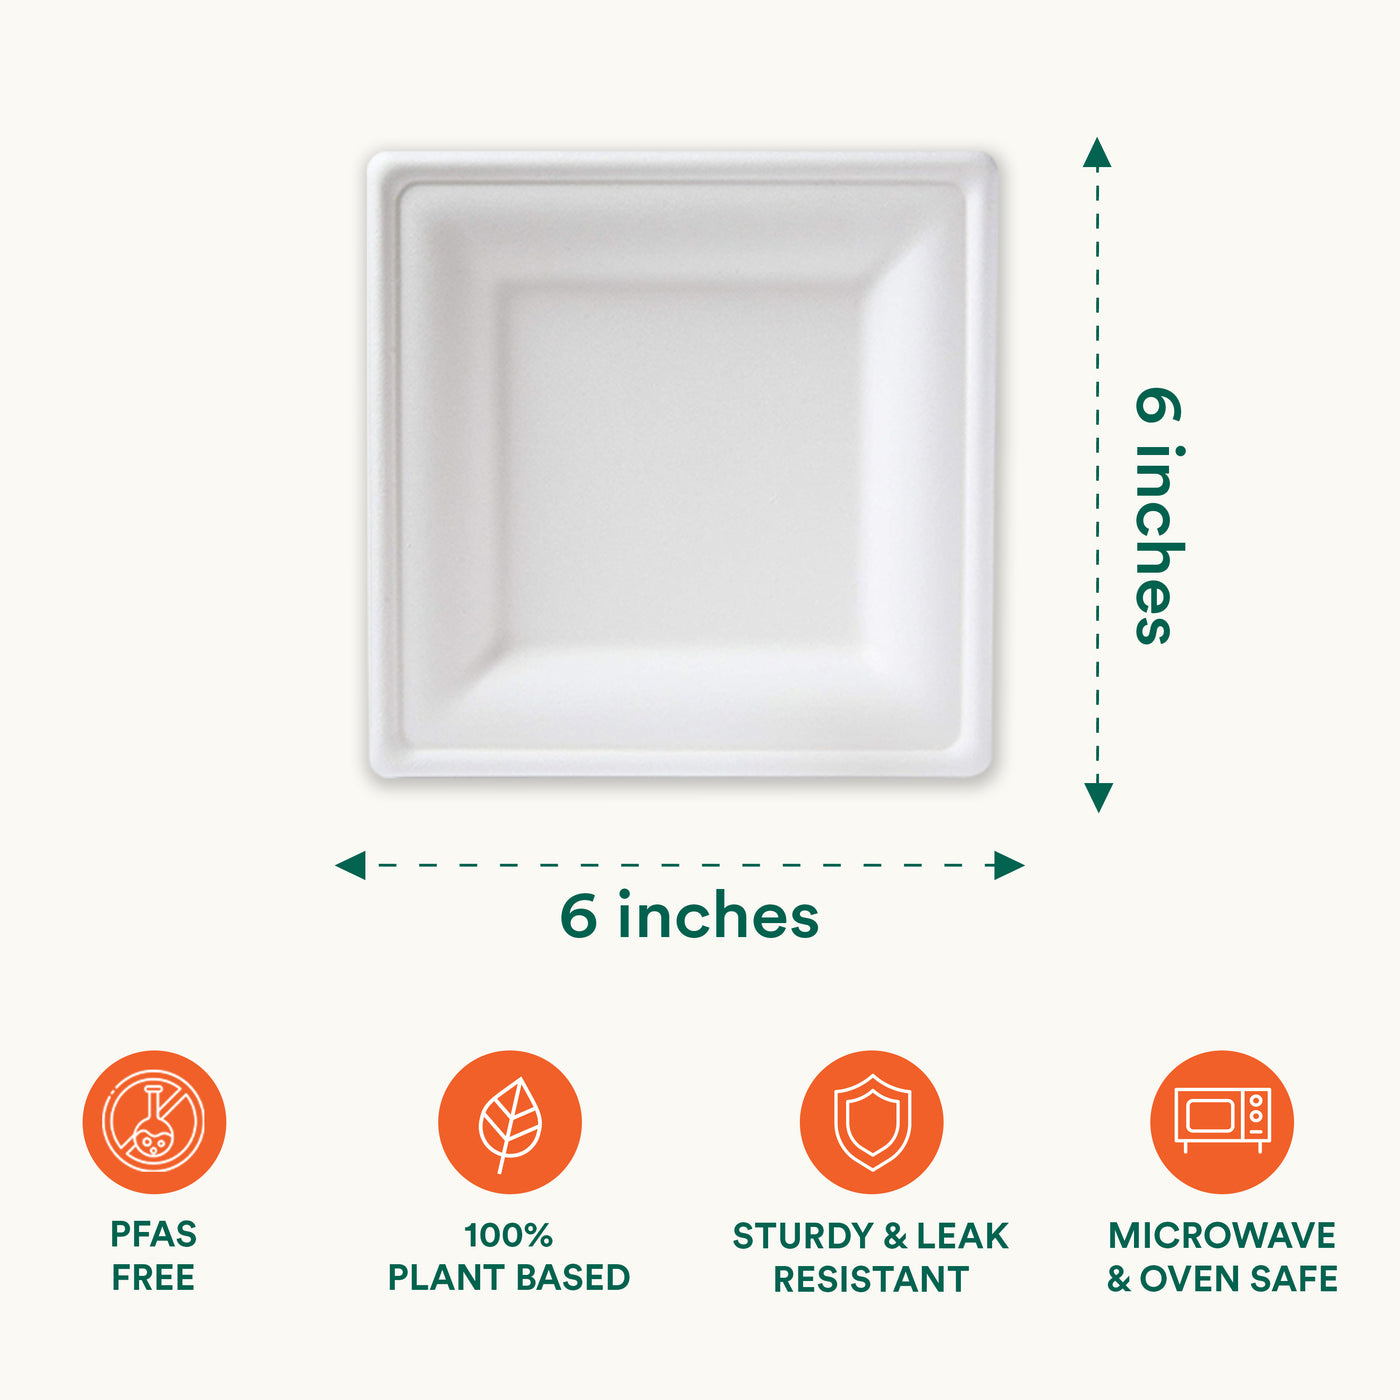 Size measurements and features displayed on a square white plate for 6 Inch Square Pearl White Compostable Plates.